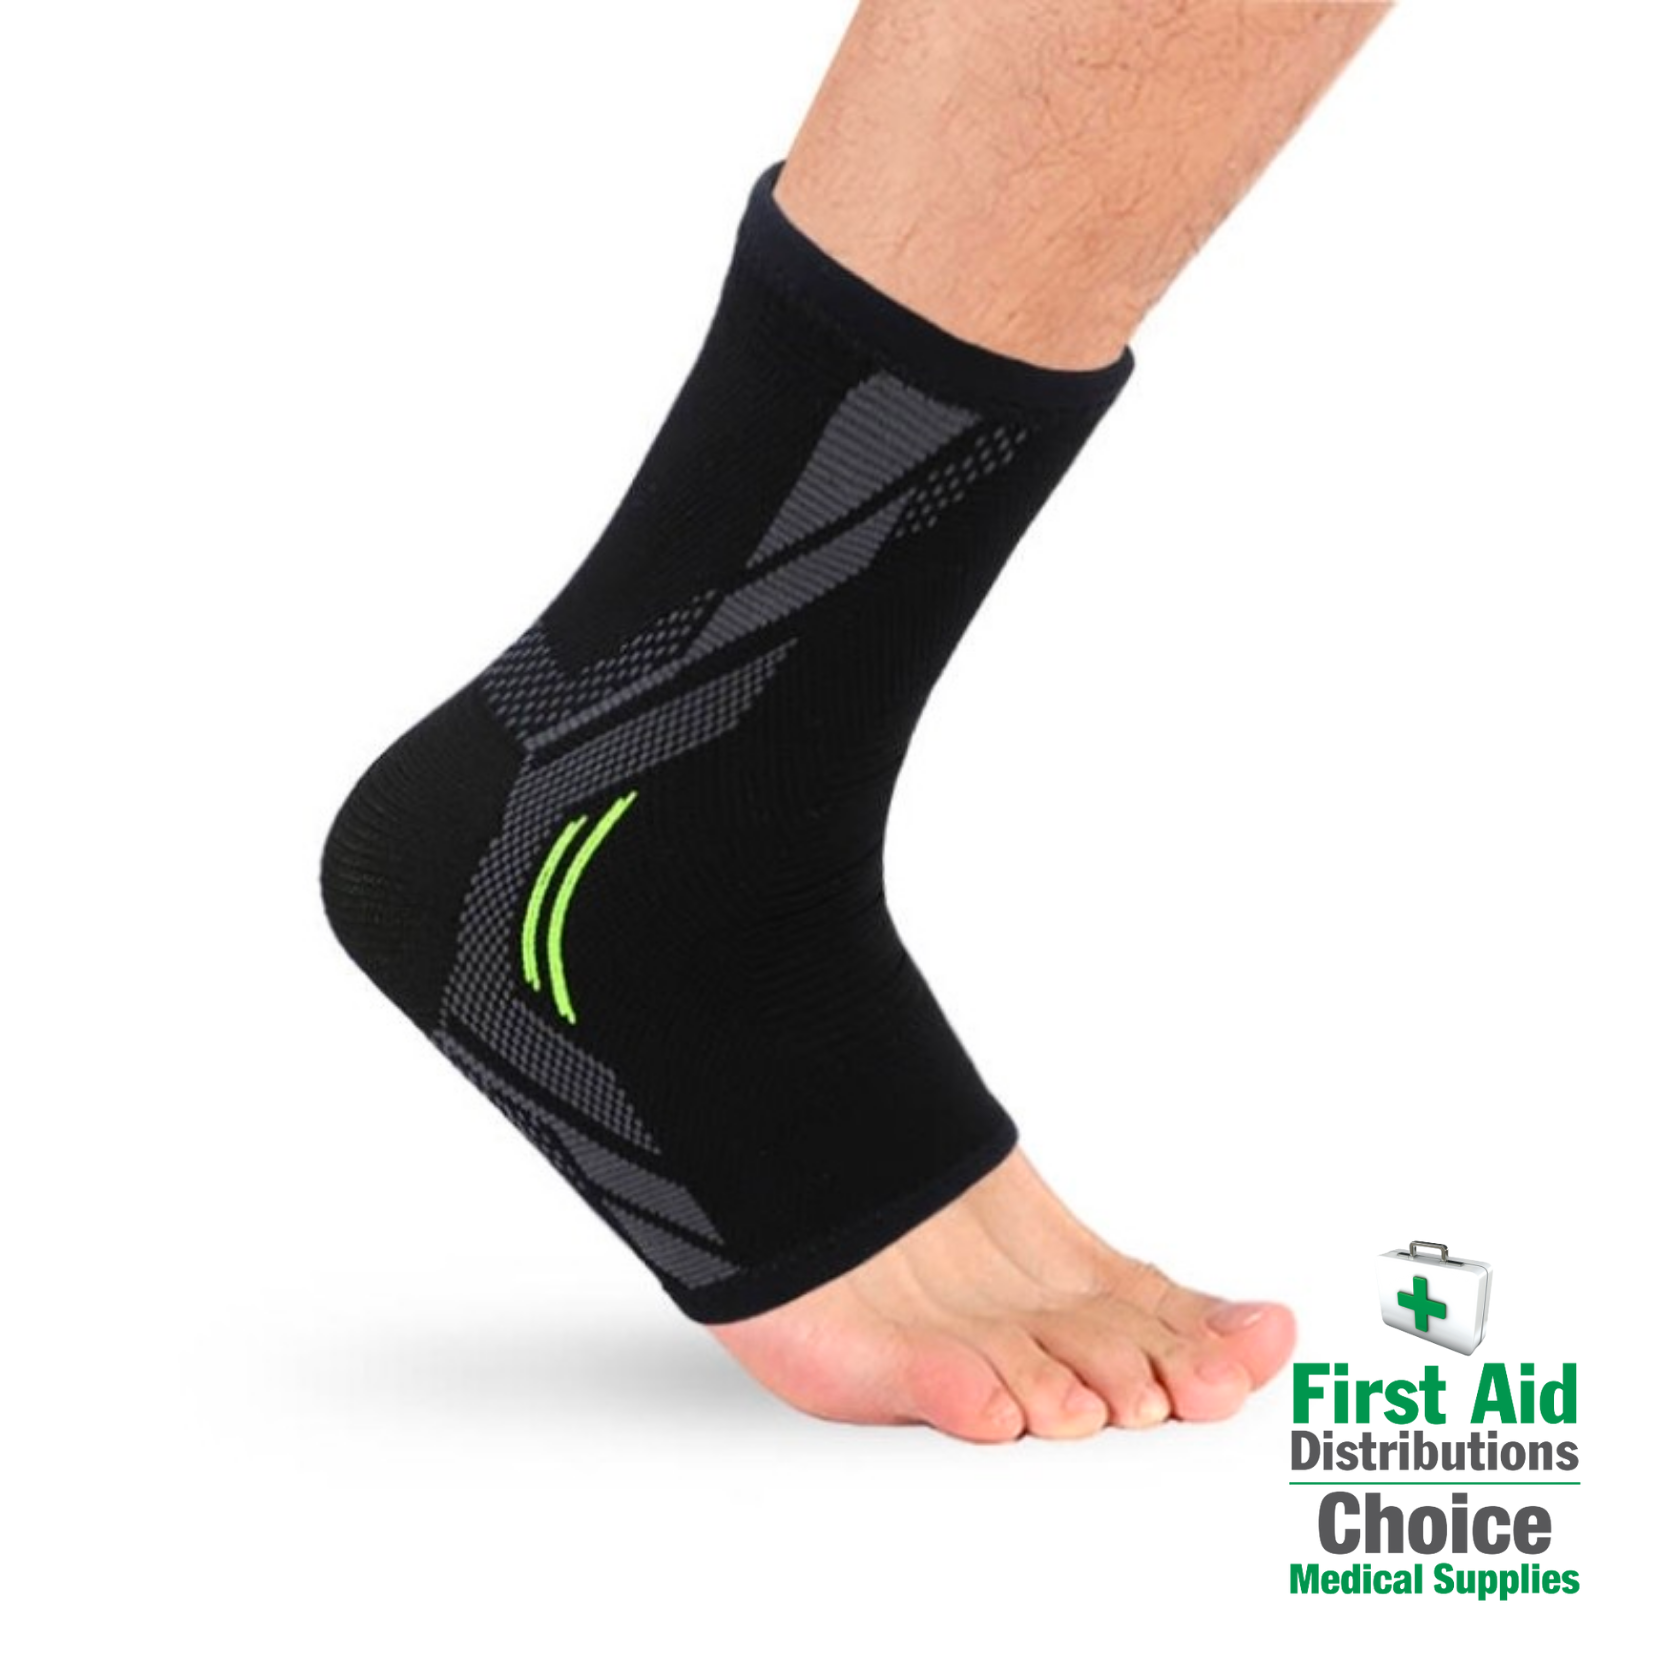 collections/Body_Assist_Contoured_Sports_Ankle_Sleeve_First_Aid_Distributions_1.png